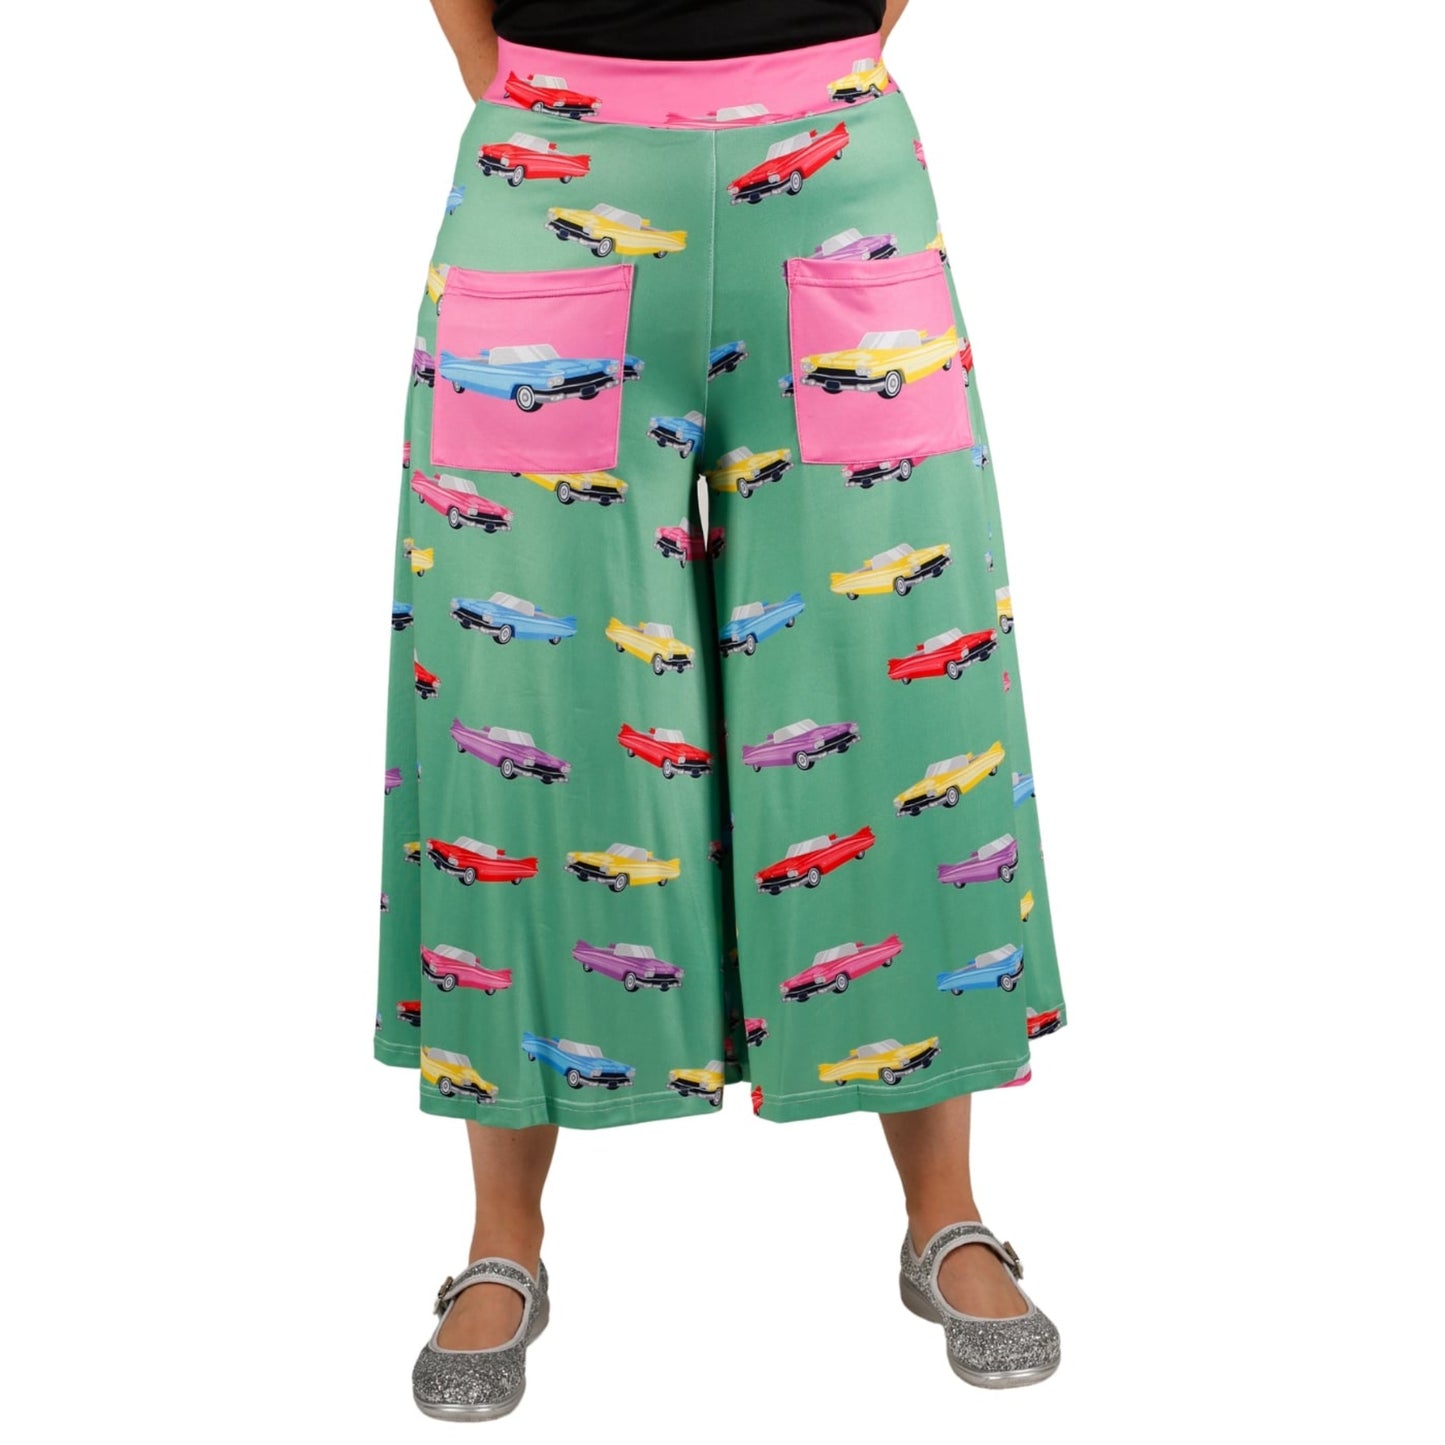 Cadillac Culottes by RainbowsAndFairies.com.au (Vintage Car - Antique - 3 Quarter Pants - Kitsch - Vintage Inspired - Pink Cadillac - Rock & Roll) - SKU: CL_CULTS_CADIL_ORG - Pic-01